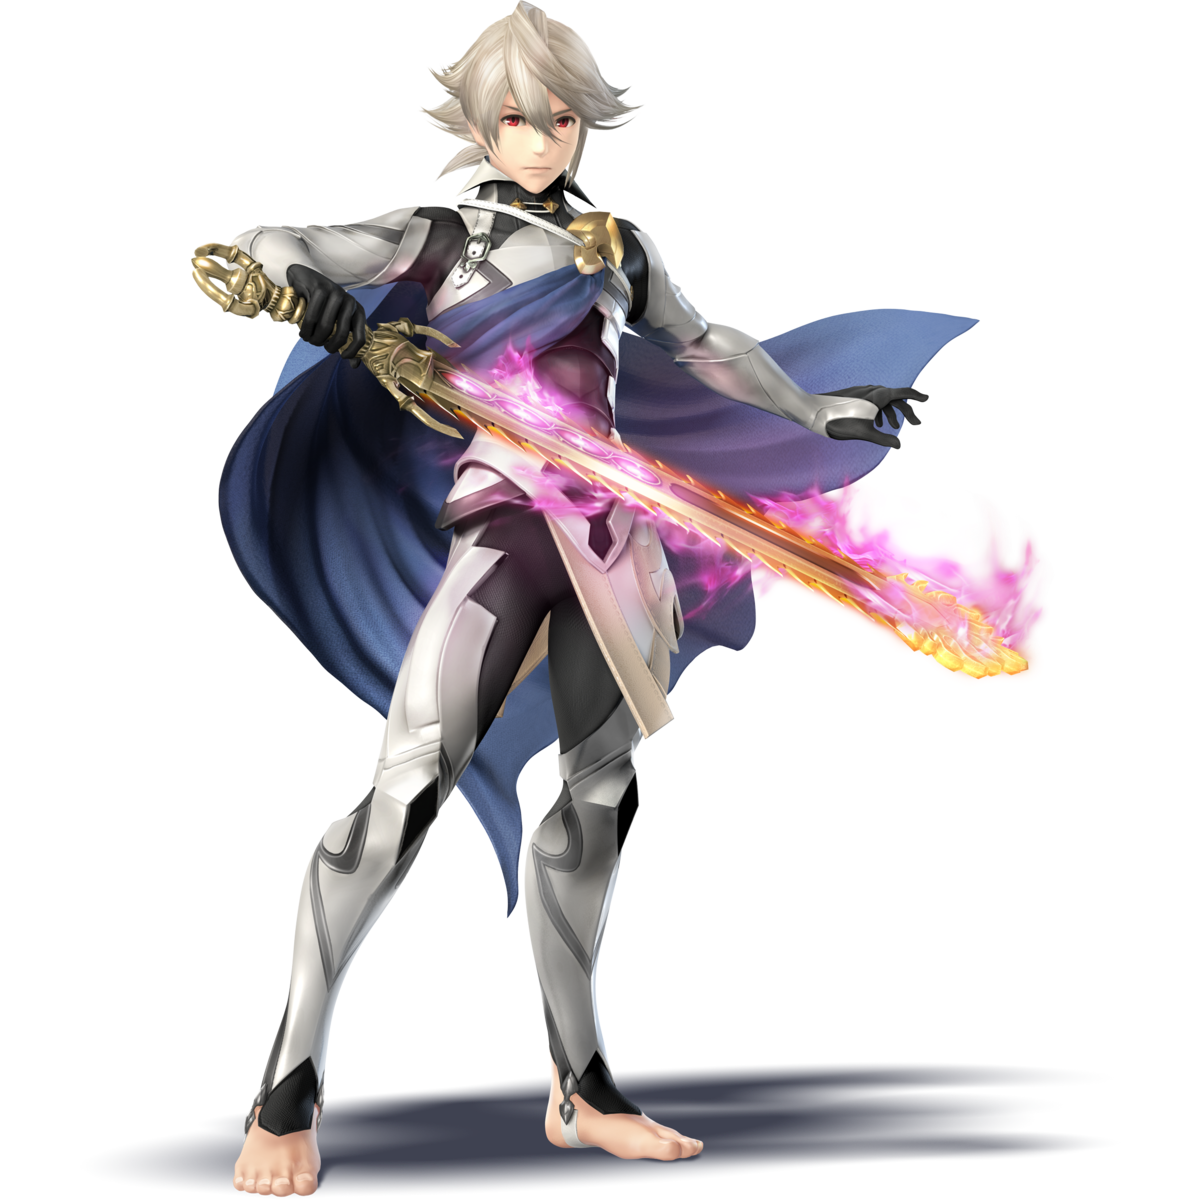 Cloud, Bayonetta, Corrin, and more Links are getting new Amiibos